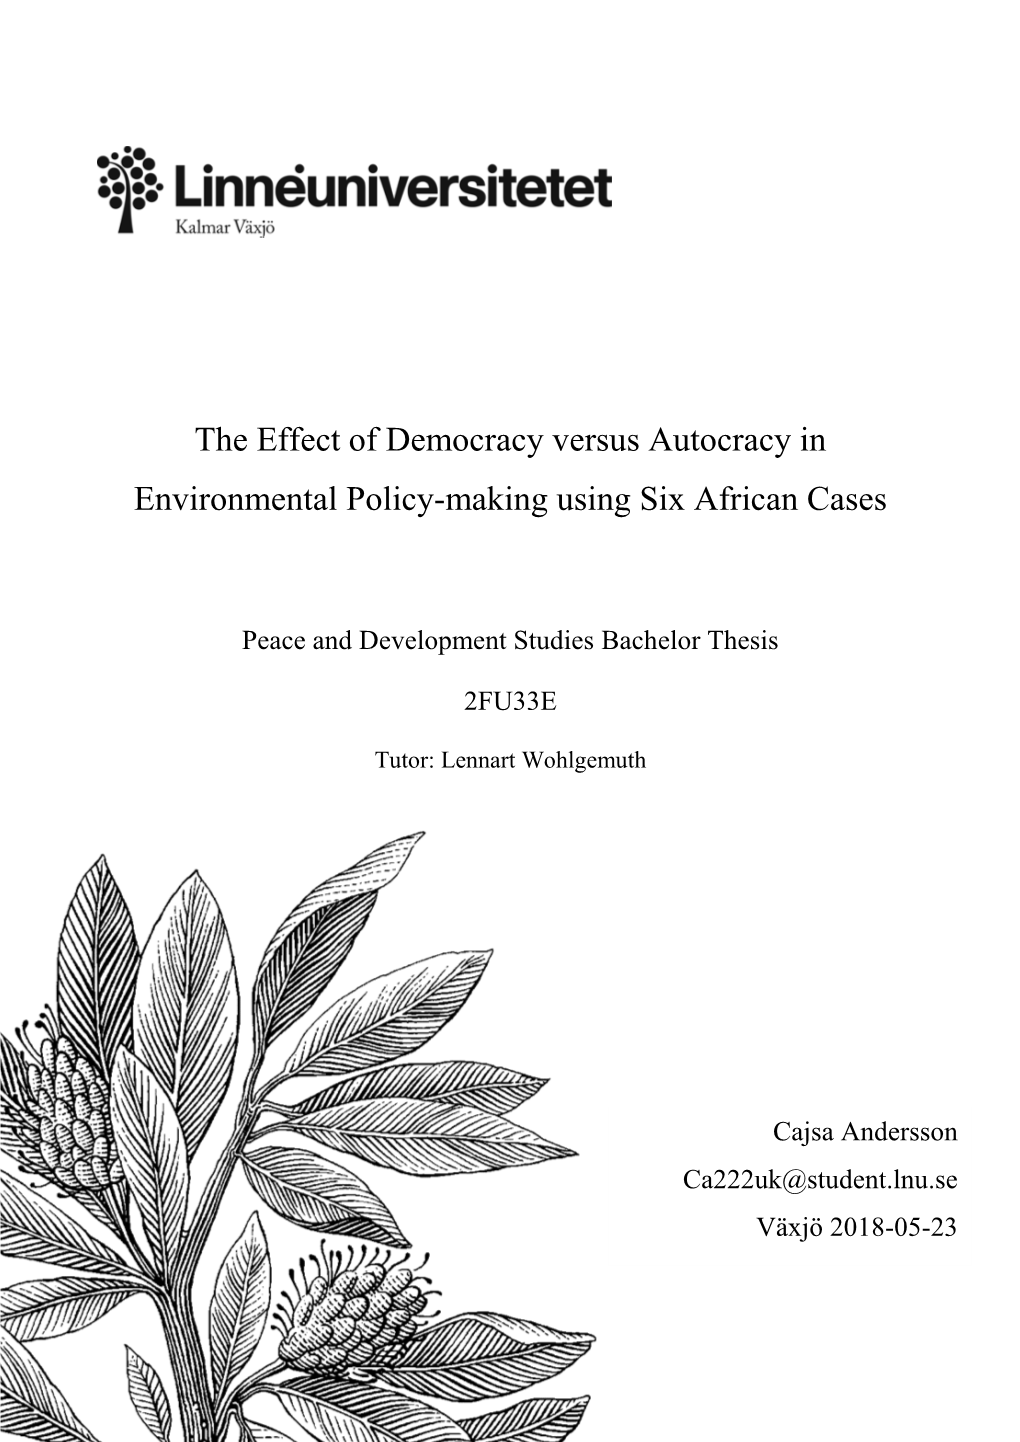 The Effect of Democracy Versus Autocracy in Environmental Policy-Making Using Six African Cases